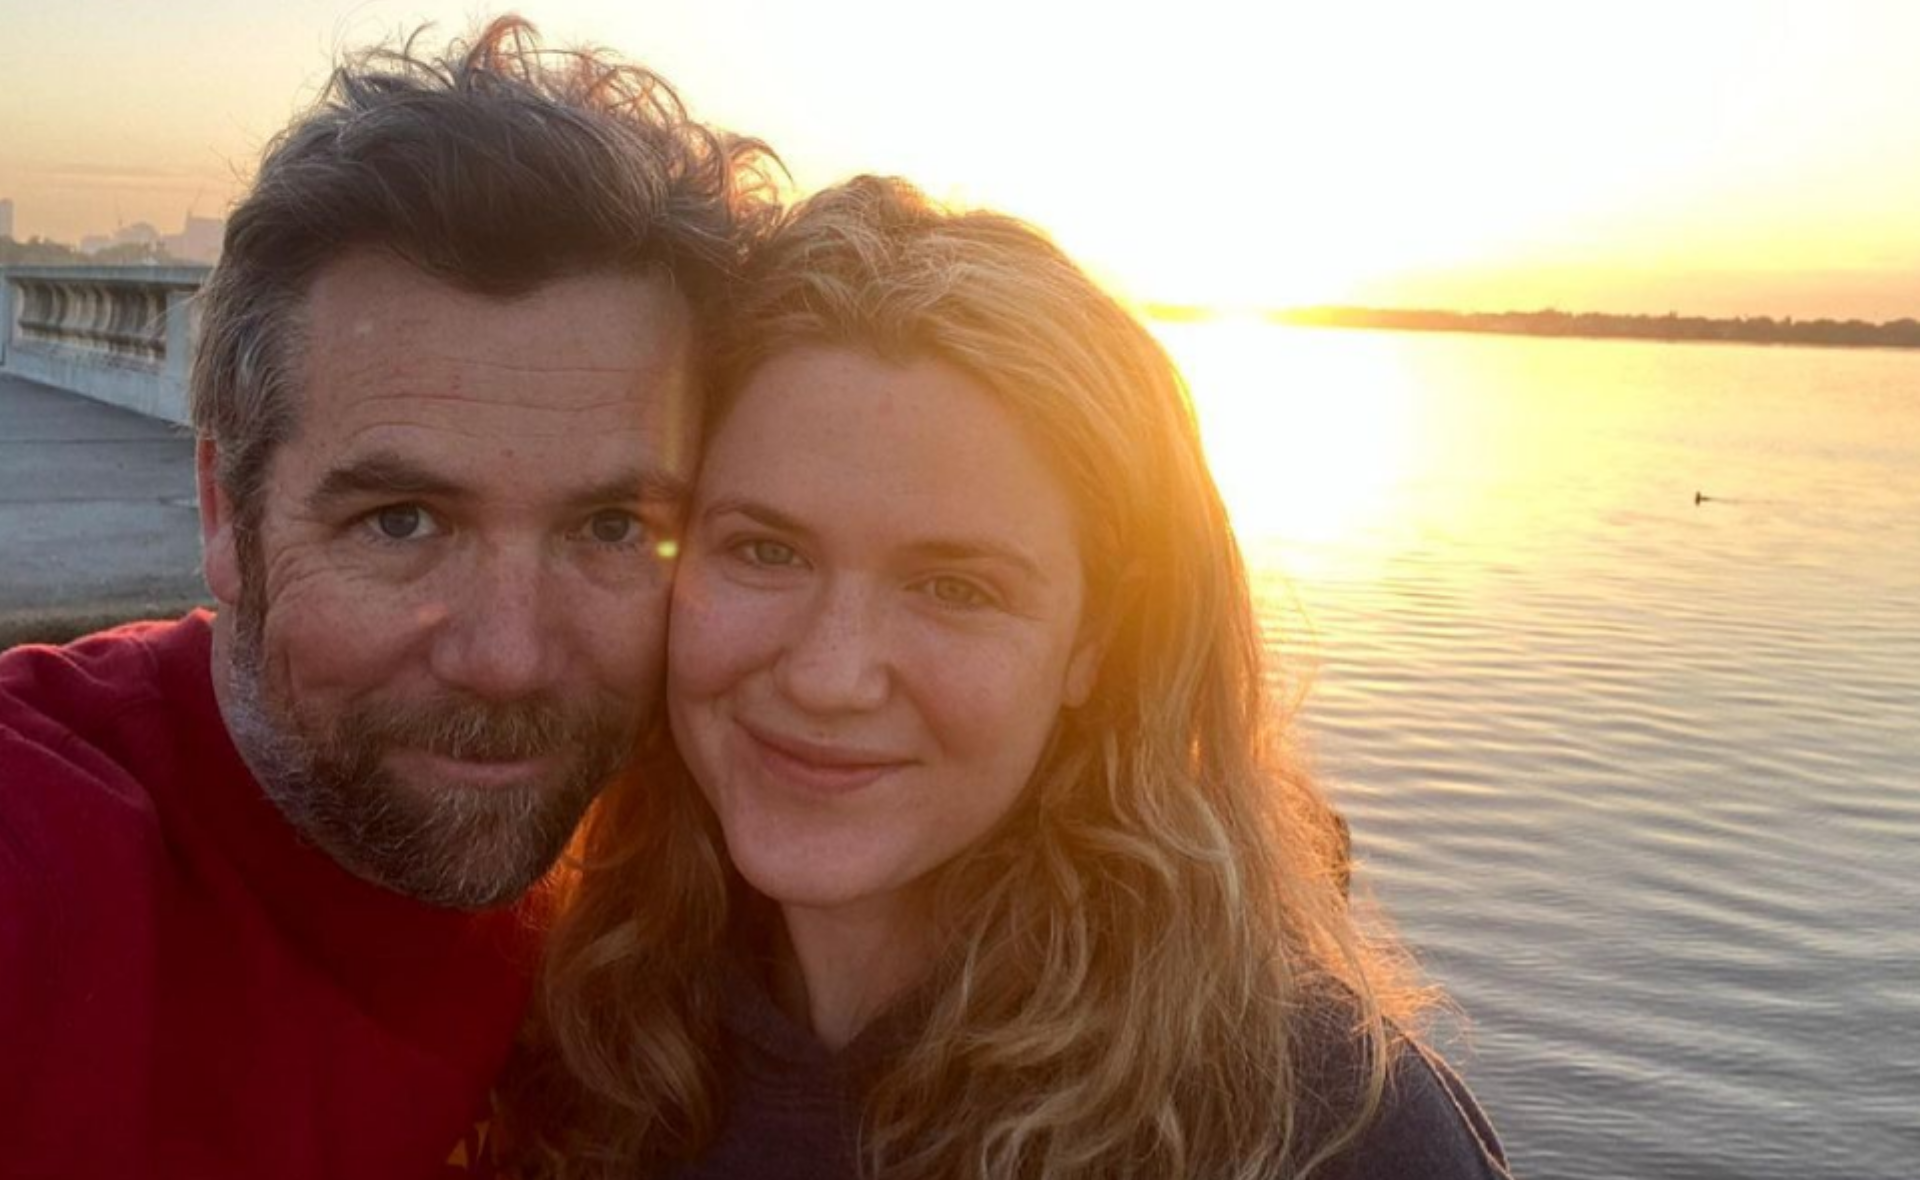 Patrick Brammall popped the question AND married Harriet Dyer all in a whirlwind five-day vacation